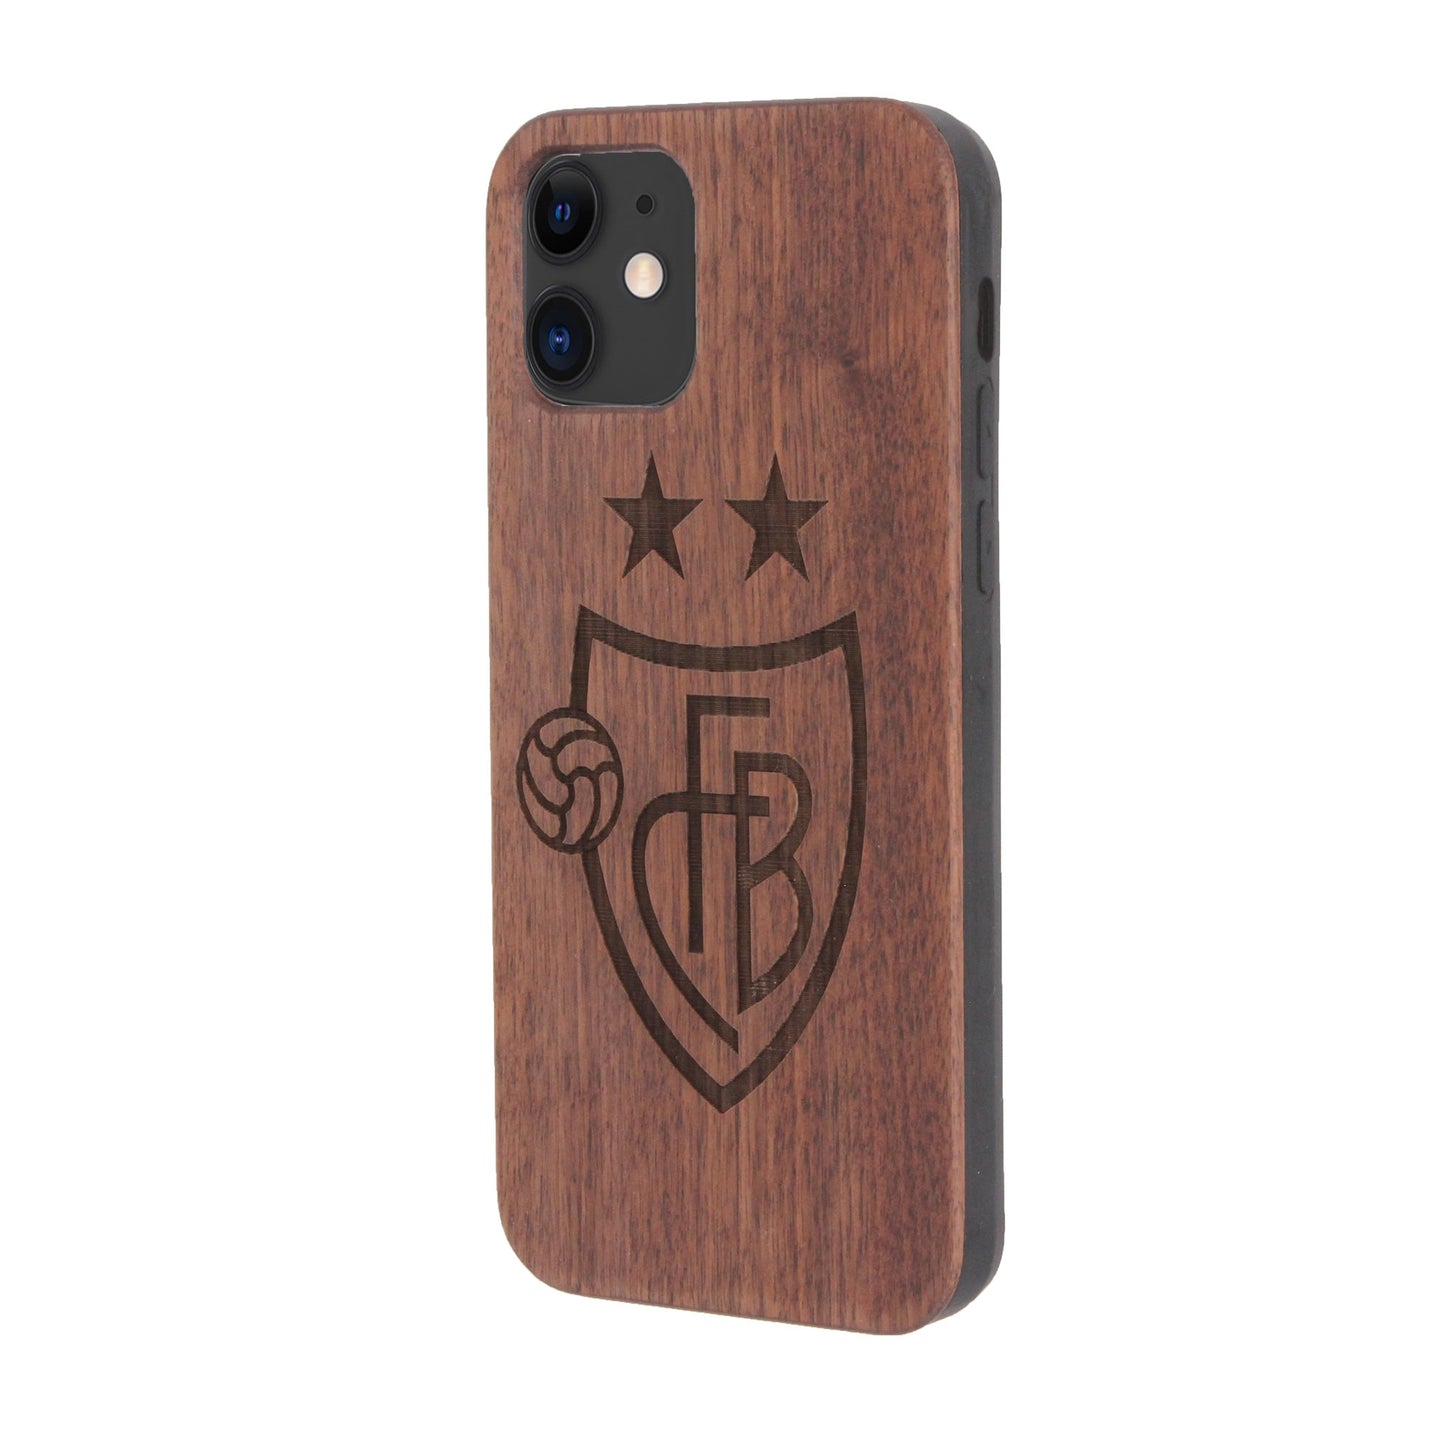 FCB Eden case made of walnut wood for iPhone 11